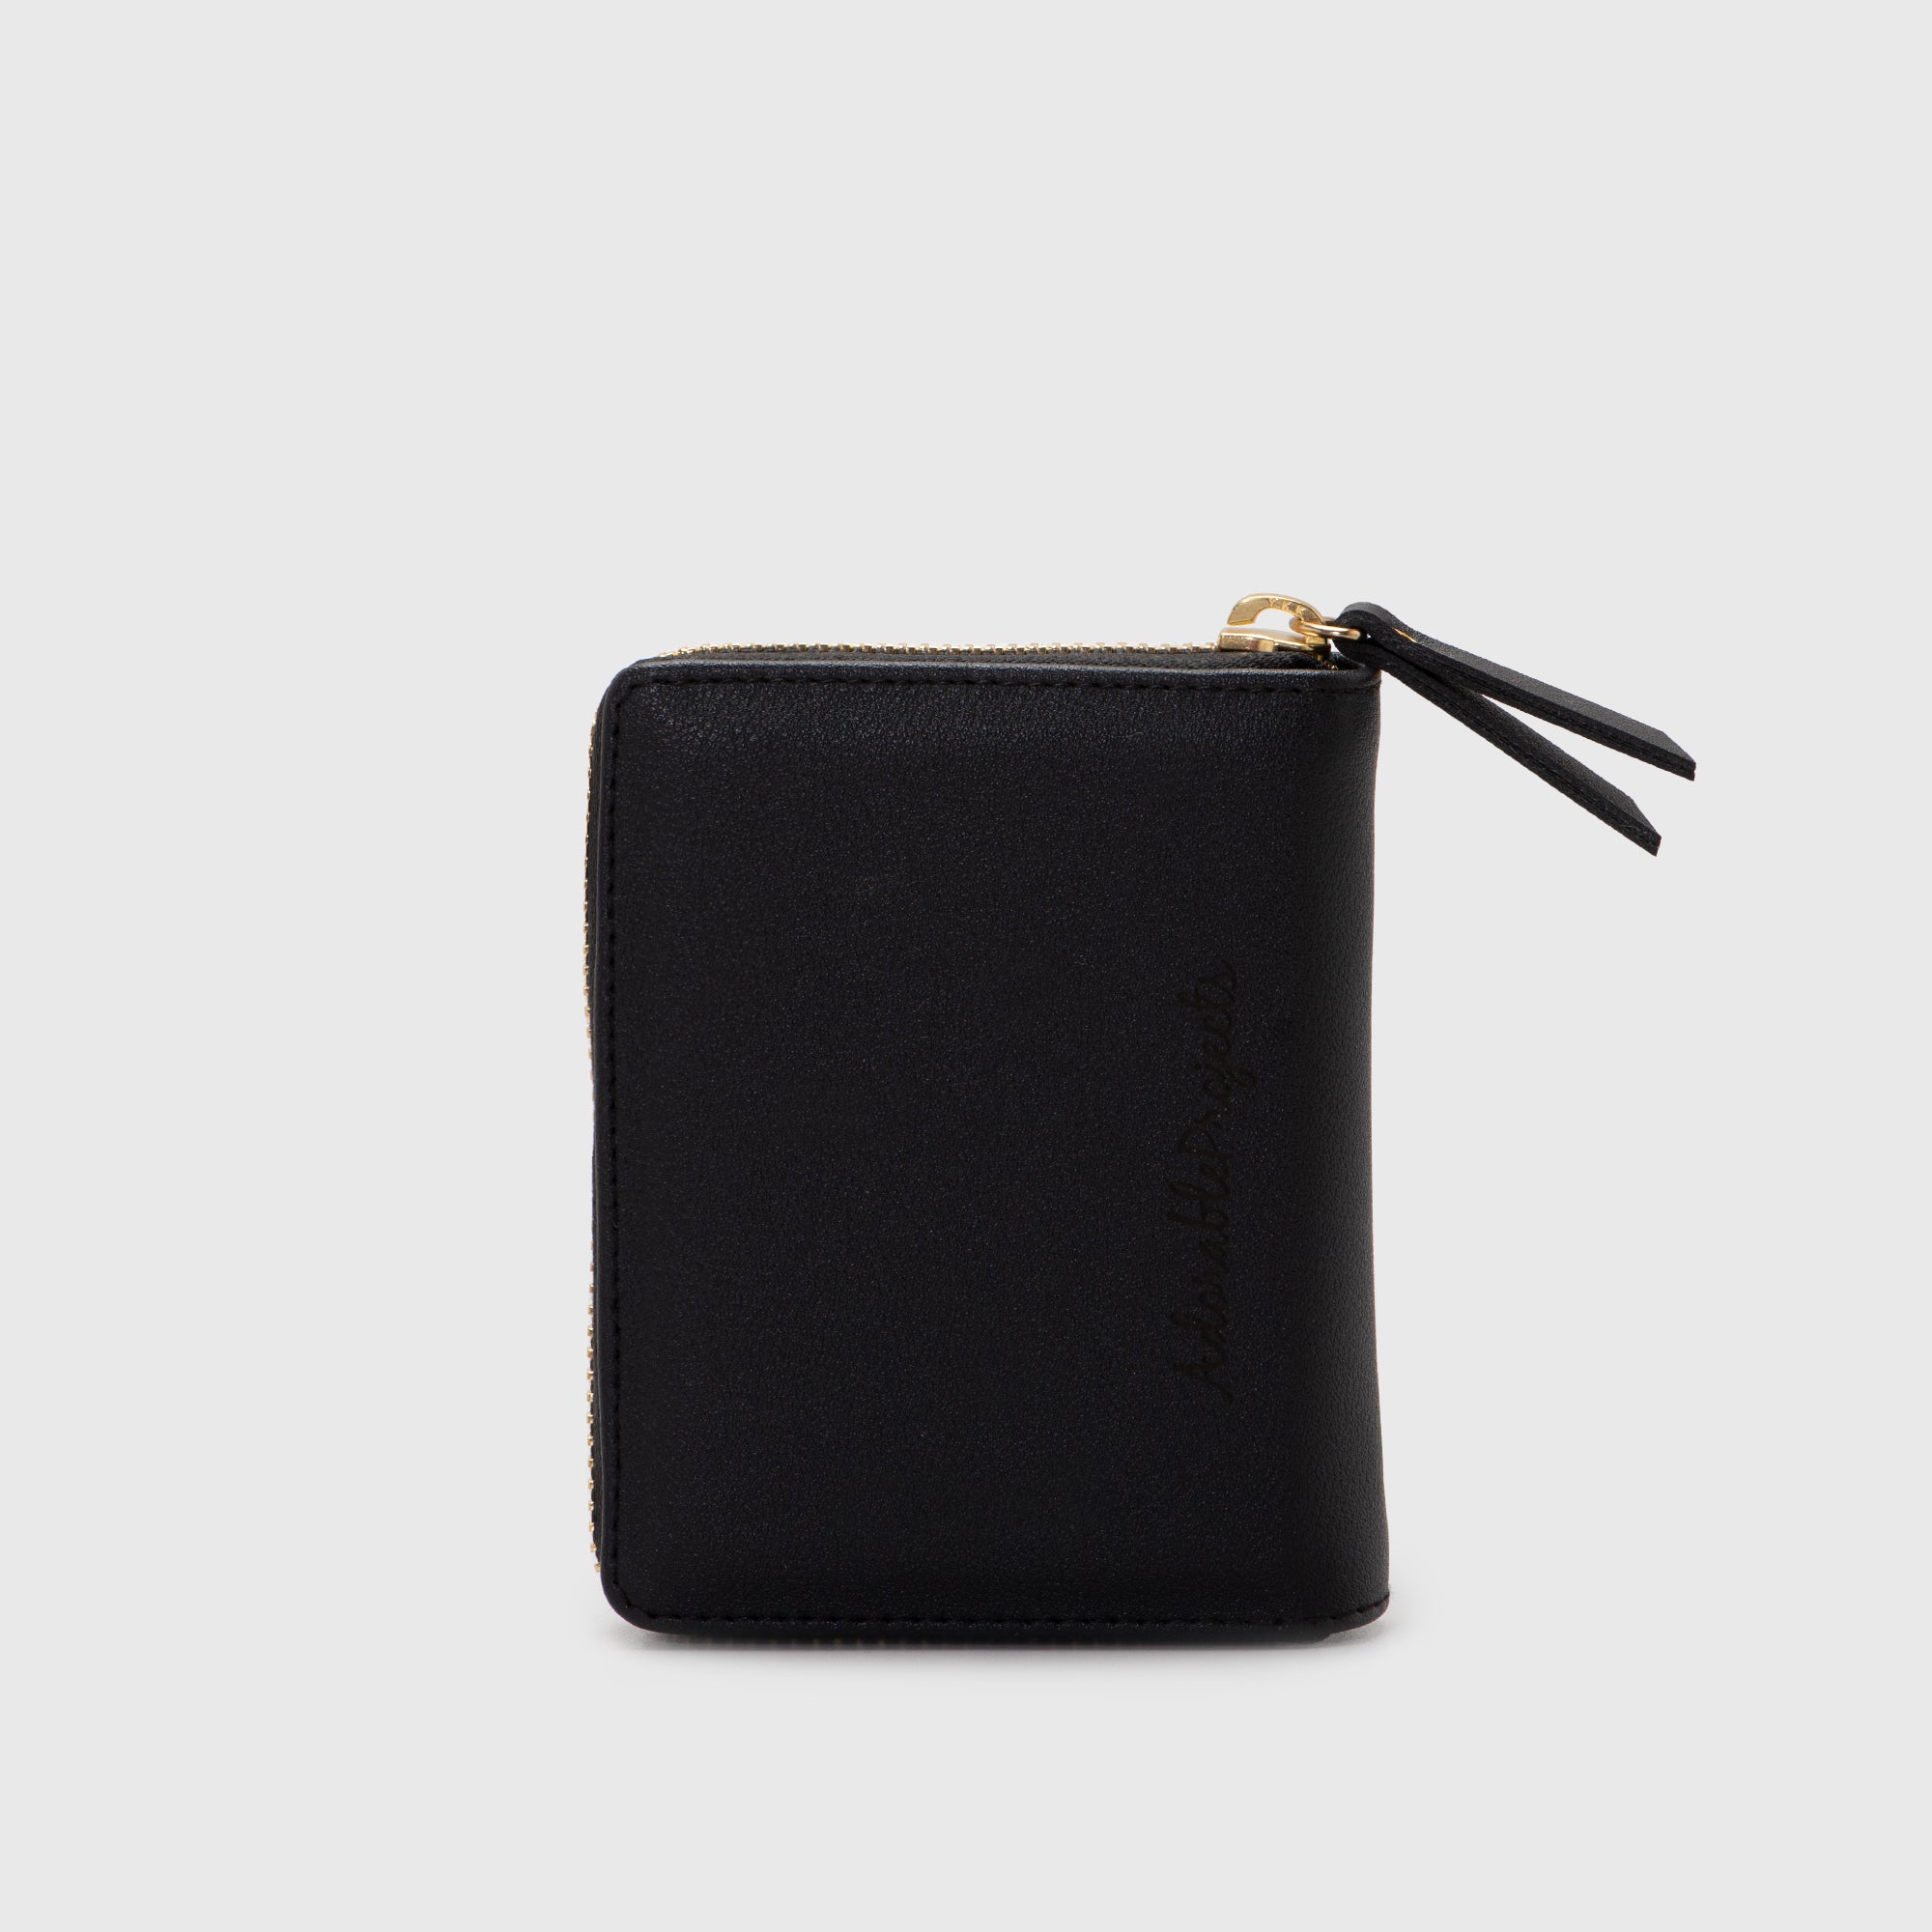 Adorable Projects Official Adorableprojects - Haya Wallet Black